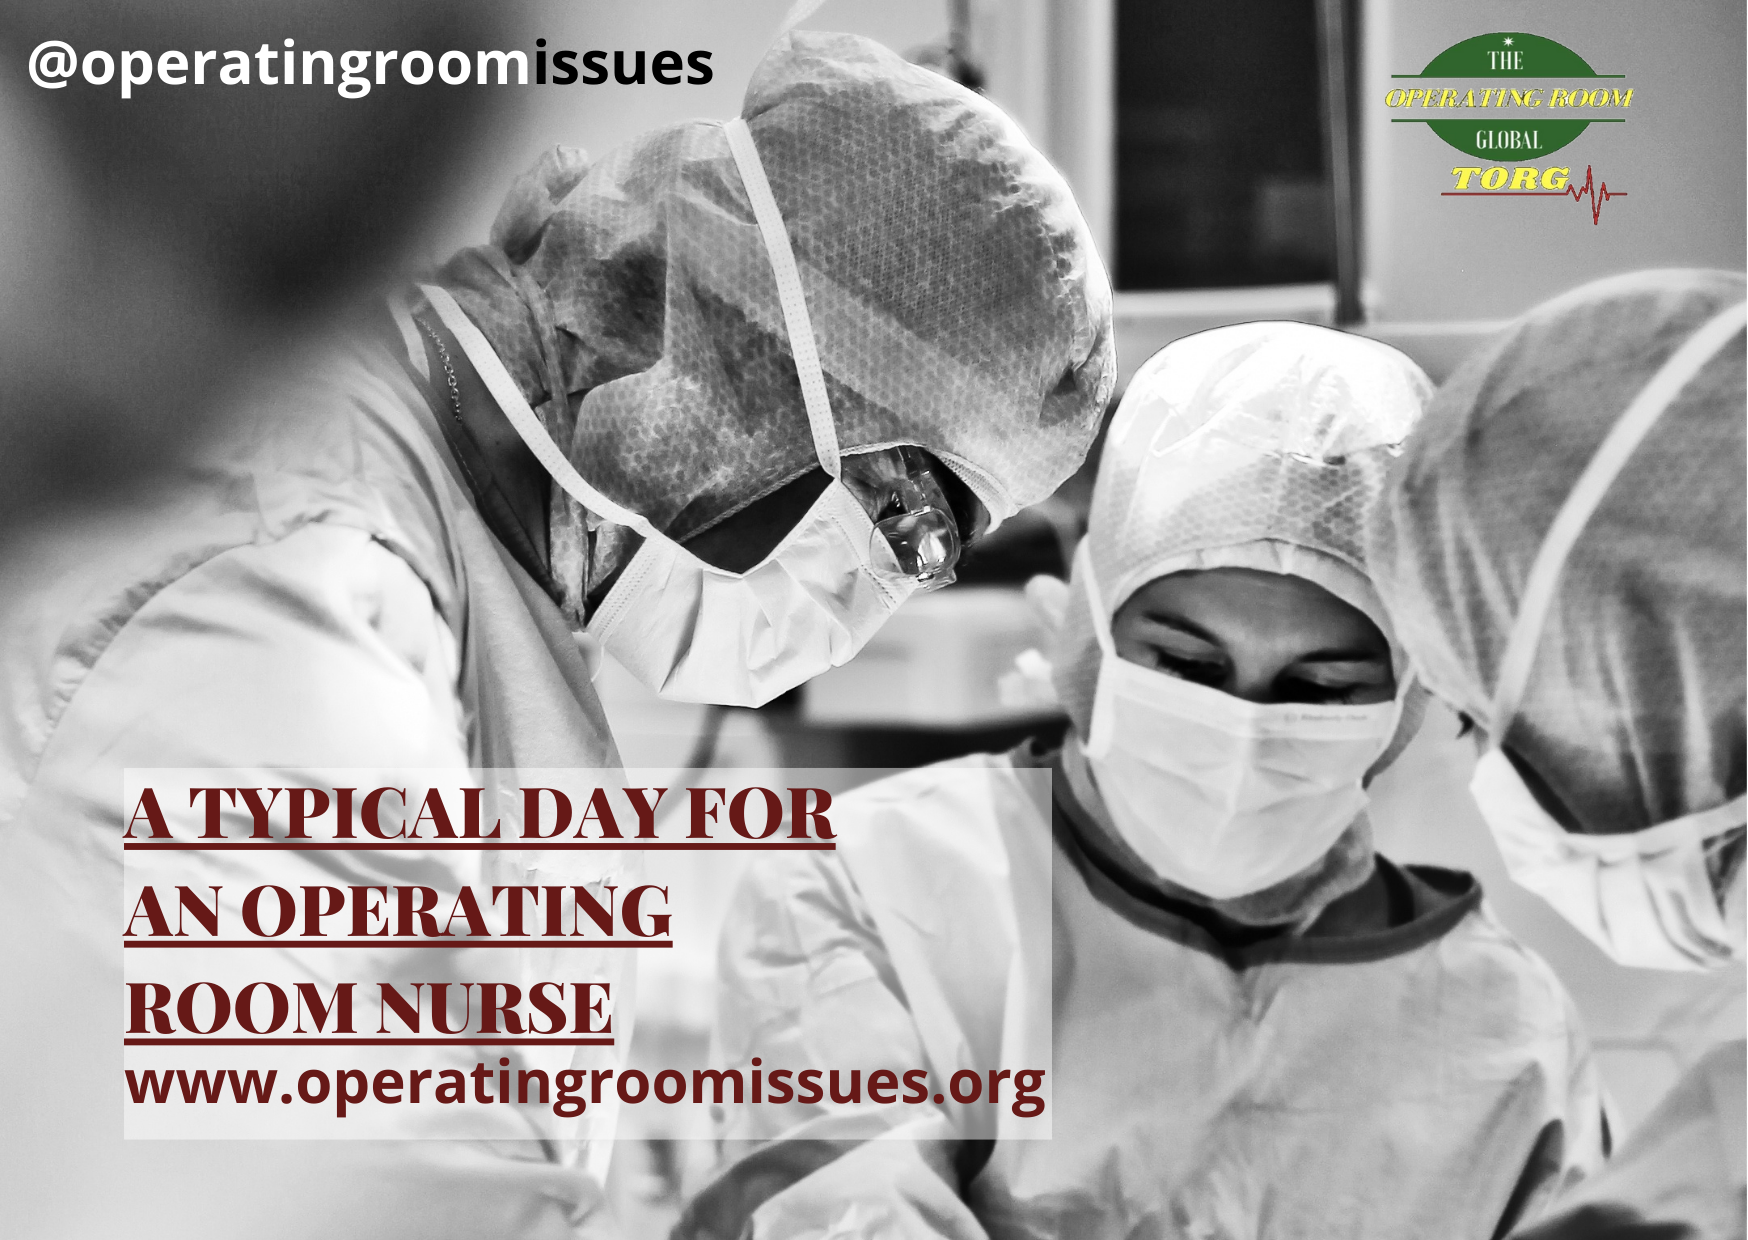 A typical day for an operating room nurse